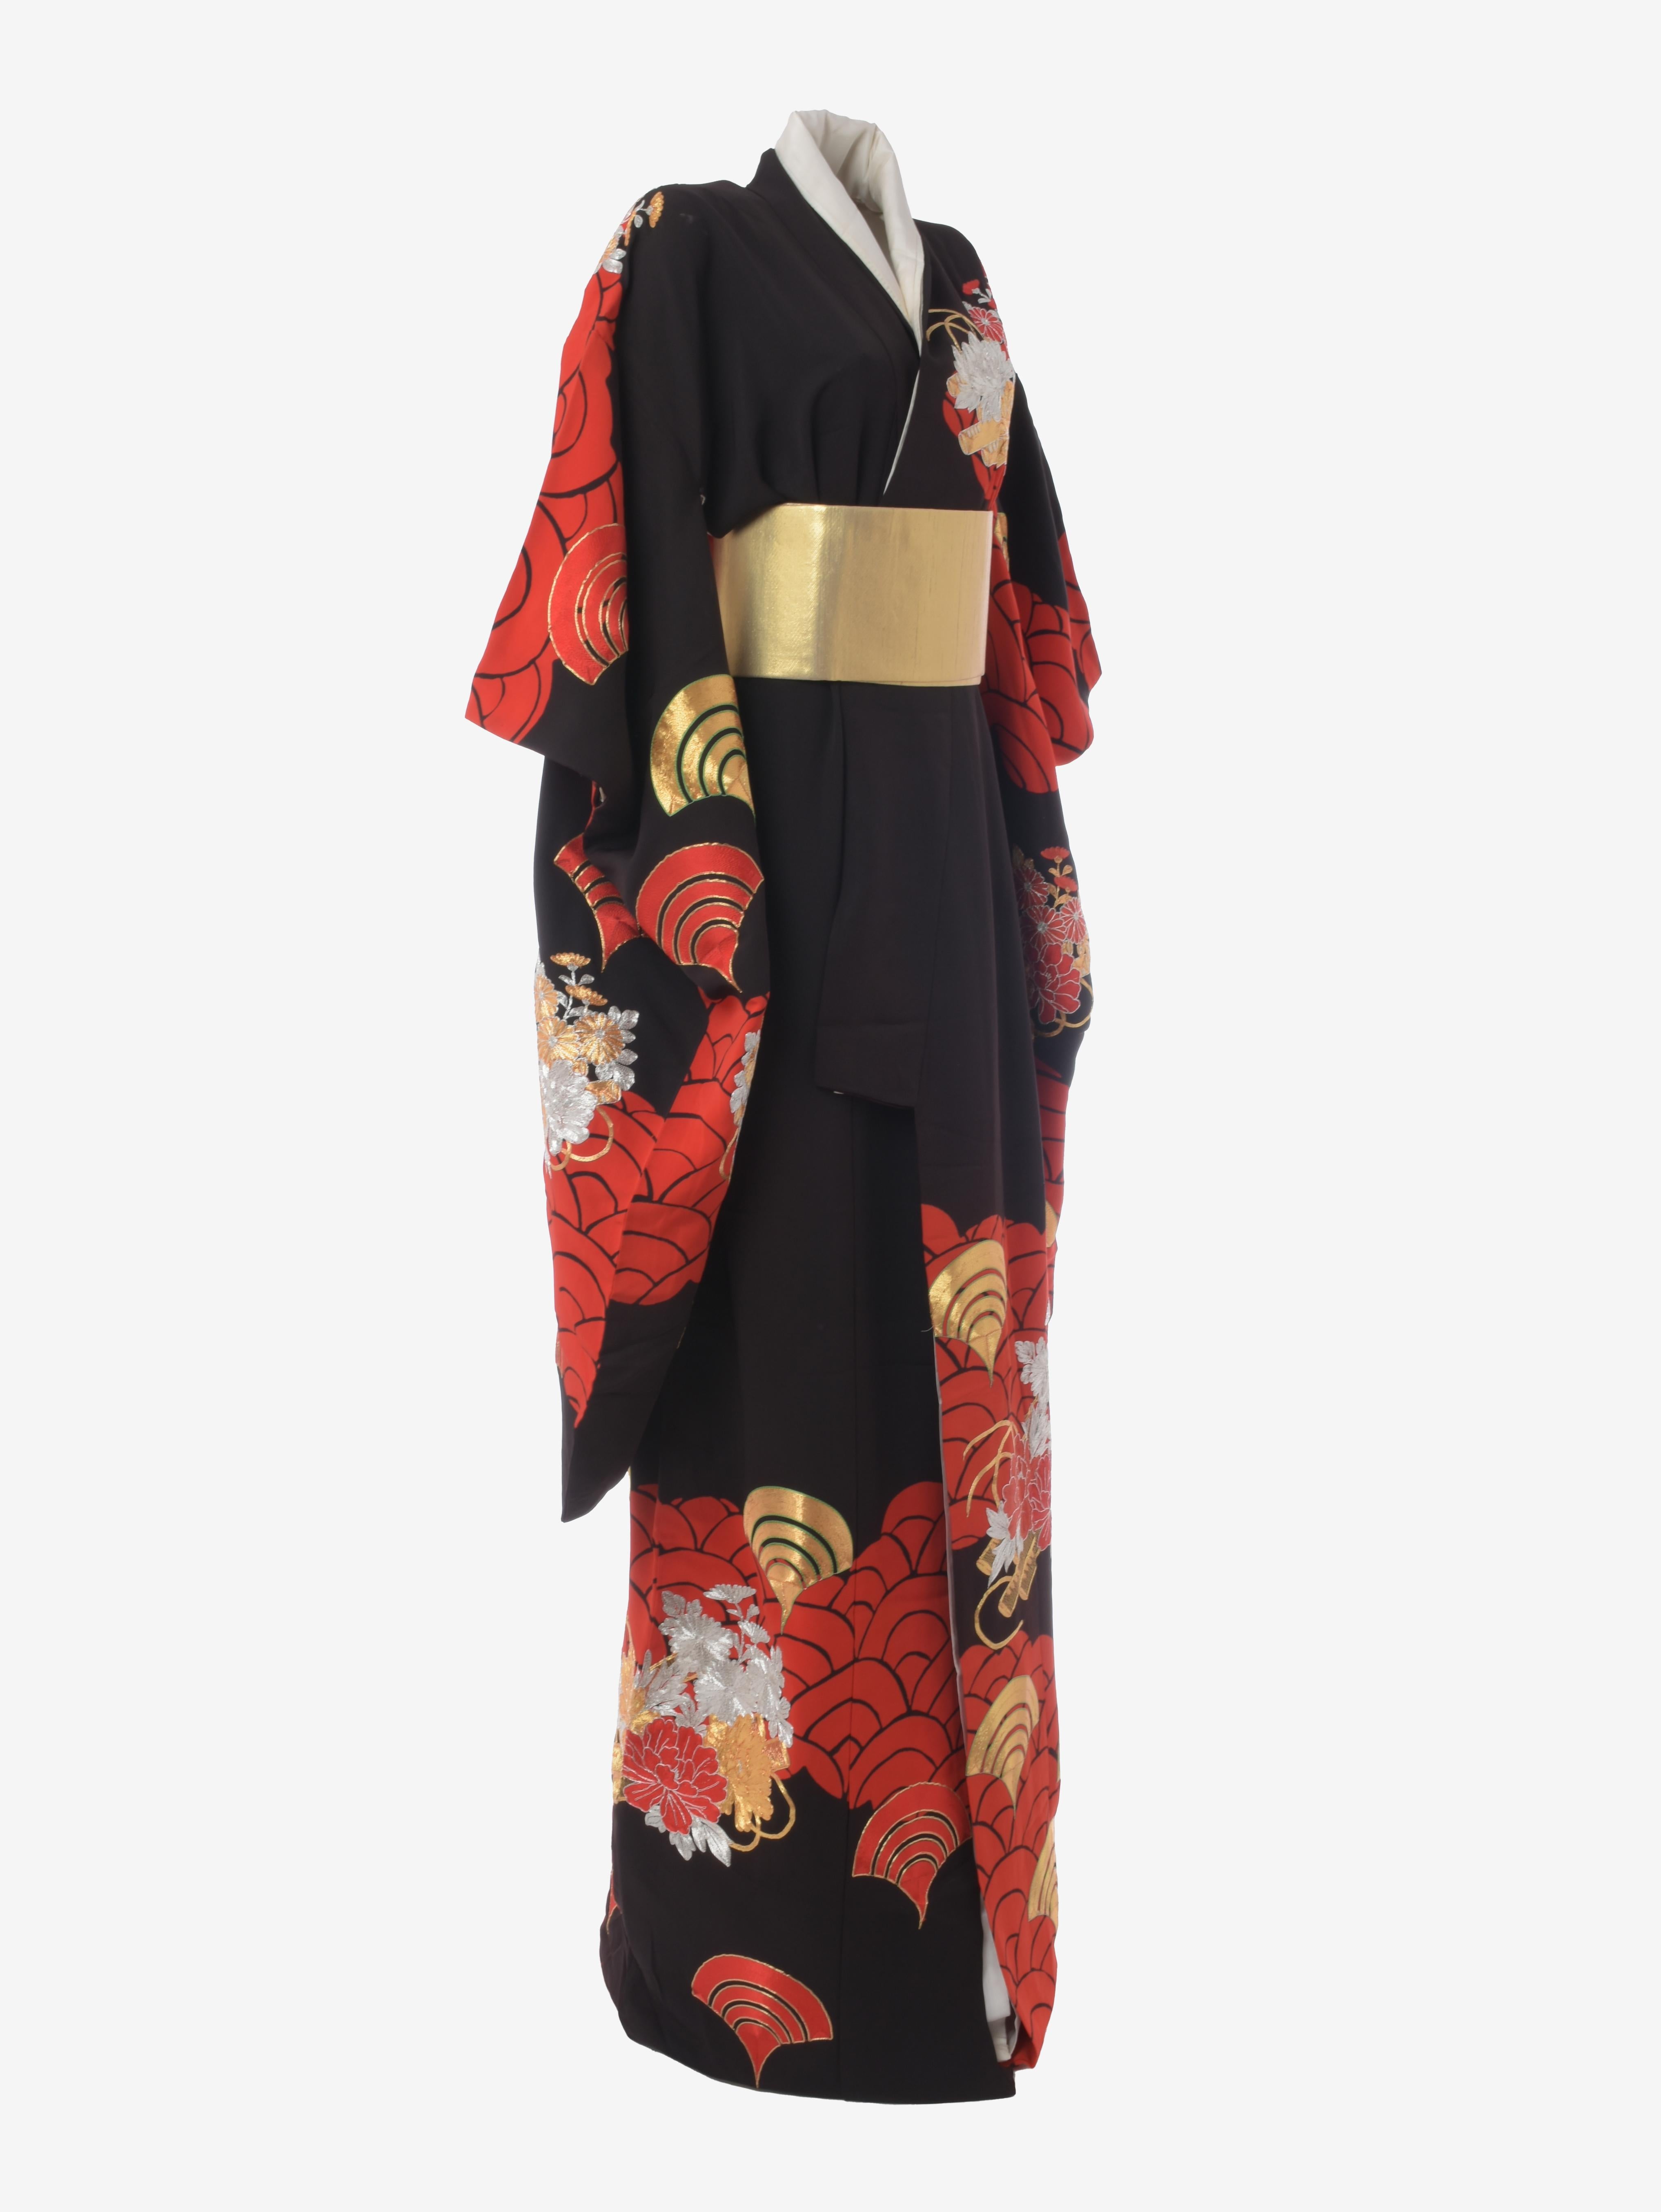 Black Kimono Uchikake is a gorgeous and majestic Japanese uchikake silk wedding kimono fully embroidered with chrysanthemum flowers and gingko leaves.

CONDITION
Very good vintage condition

COMPOSITION
100%